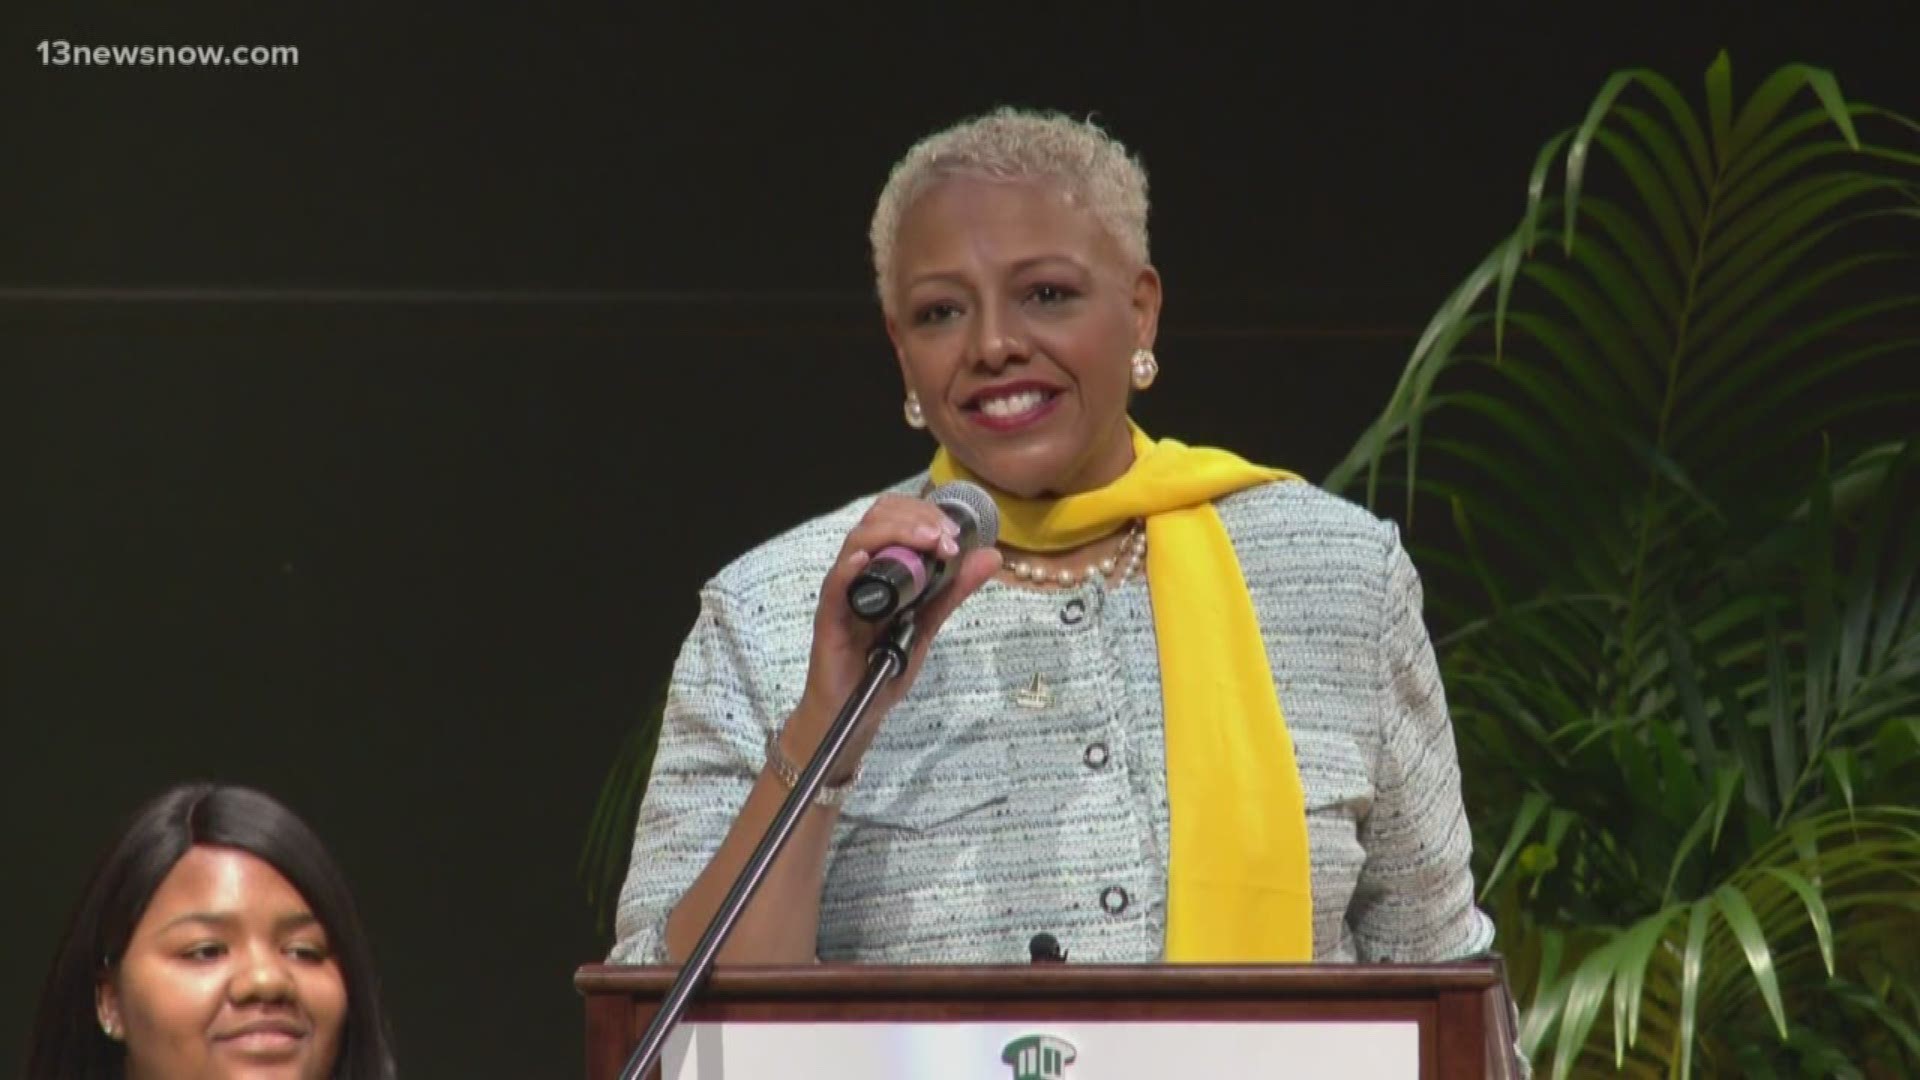 A new president was named at Norfolk State University during a ceremony Feb. 22